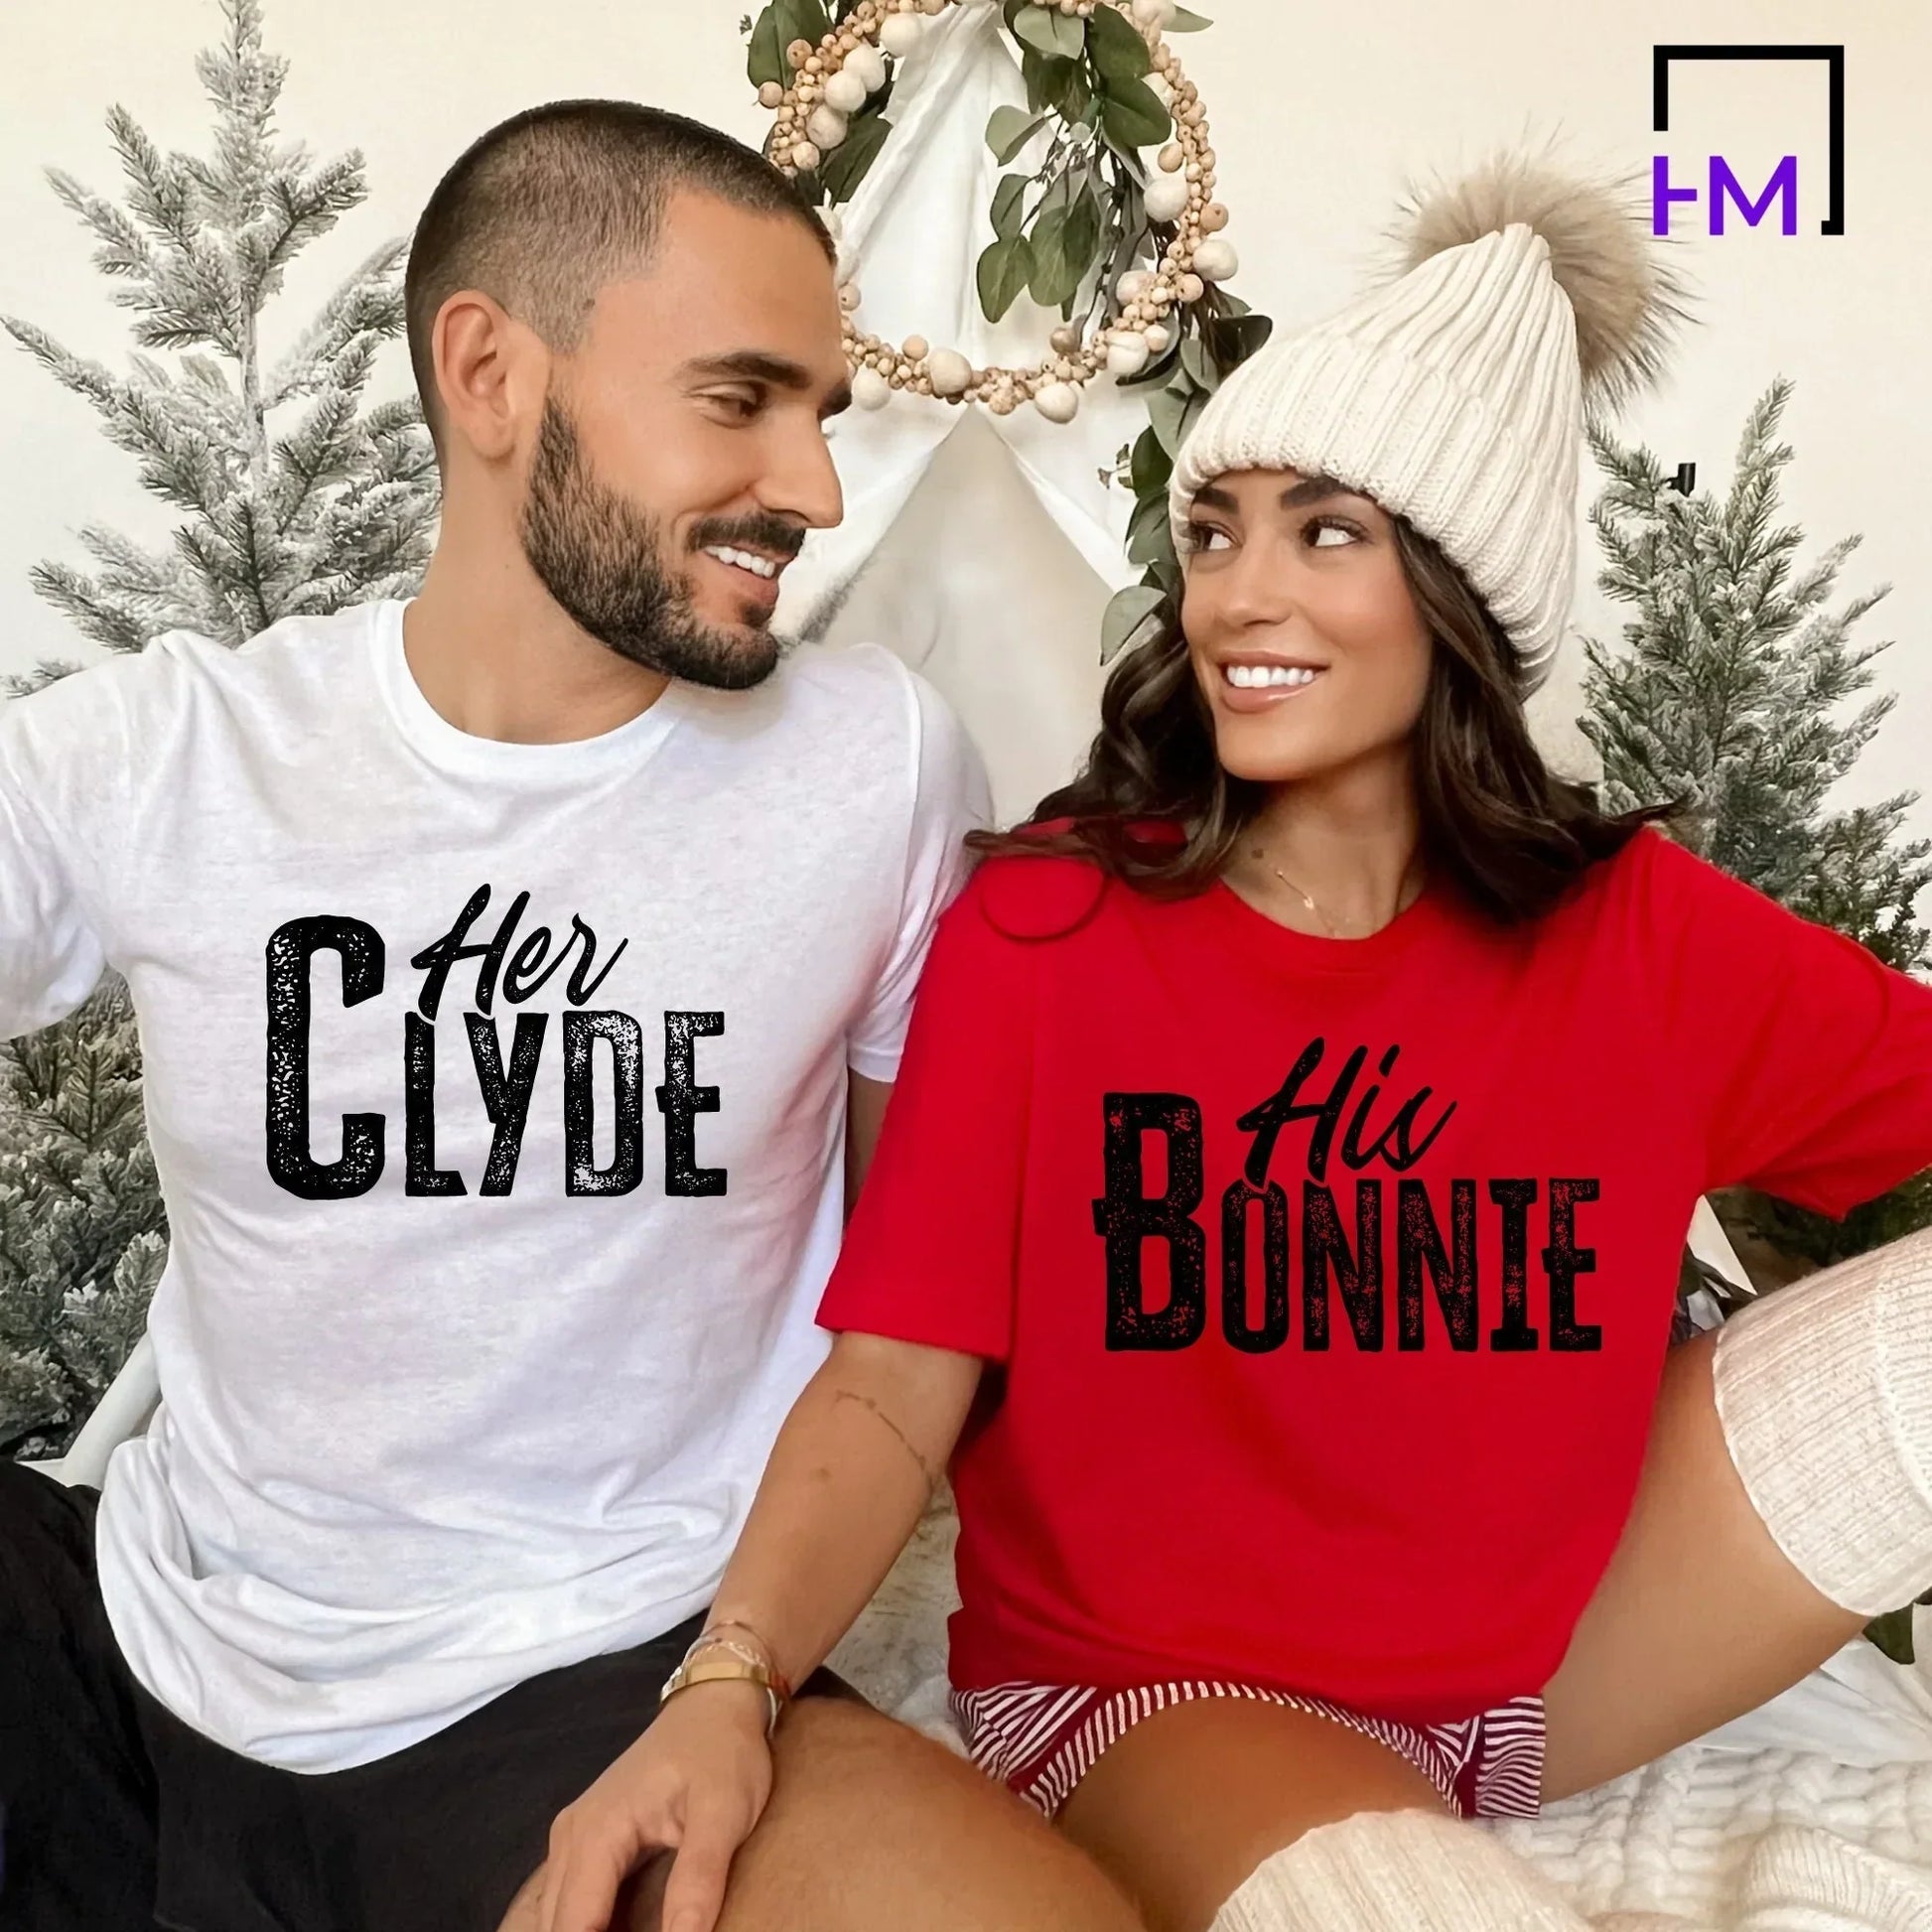 Funny Couples Shirts, Bonnie Clyde Gift for boyfriend, Wife, Husband, Engagement Announcement, Cute Couples Sweater/Hoodie, Wedding Present HMDesignStudioUS